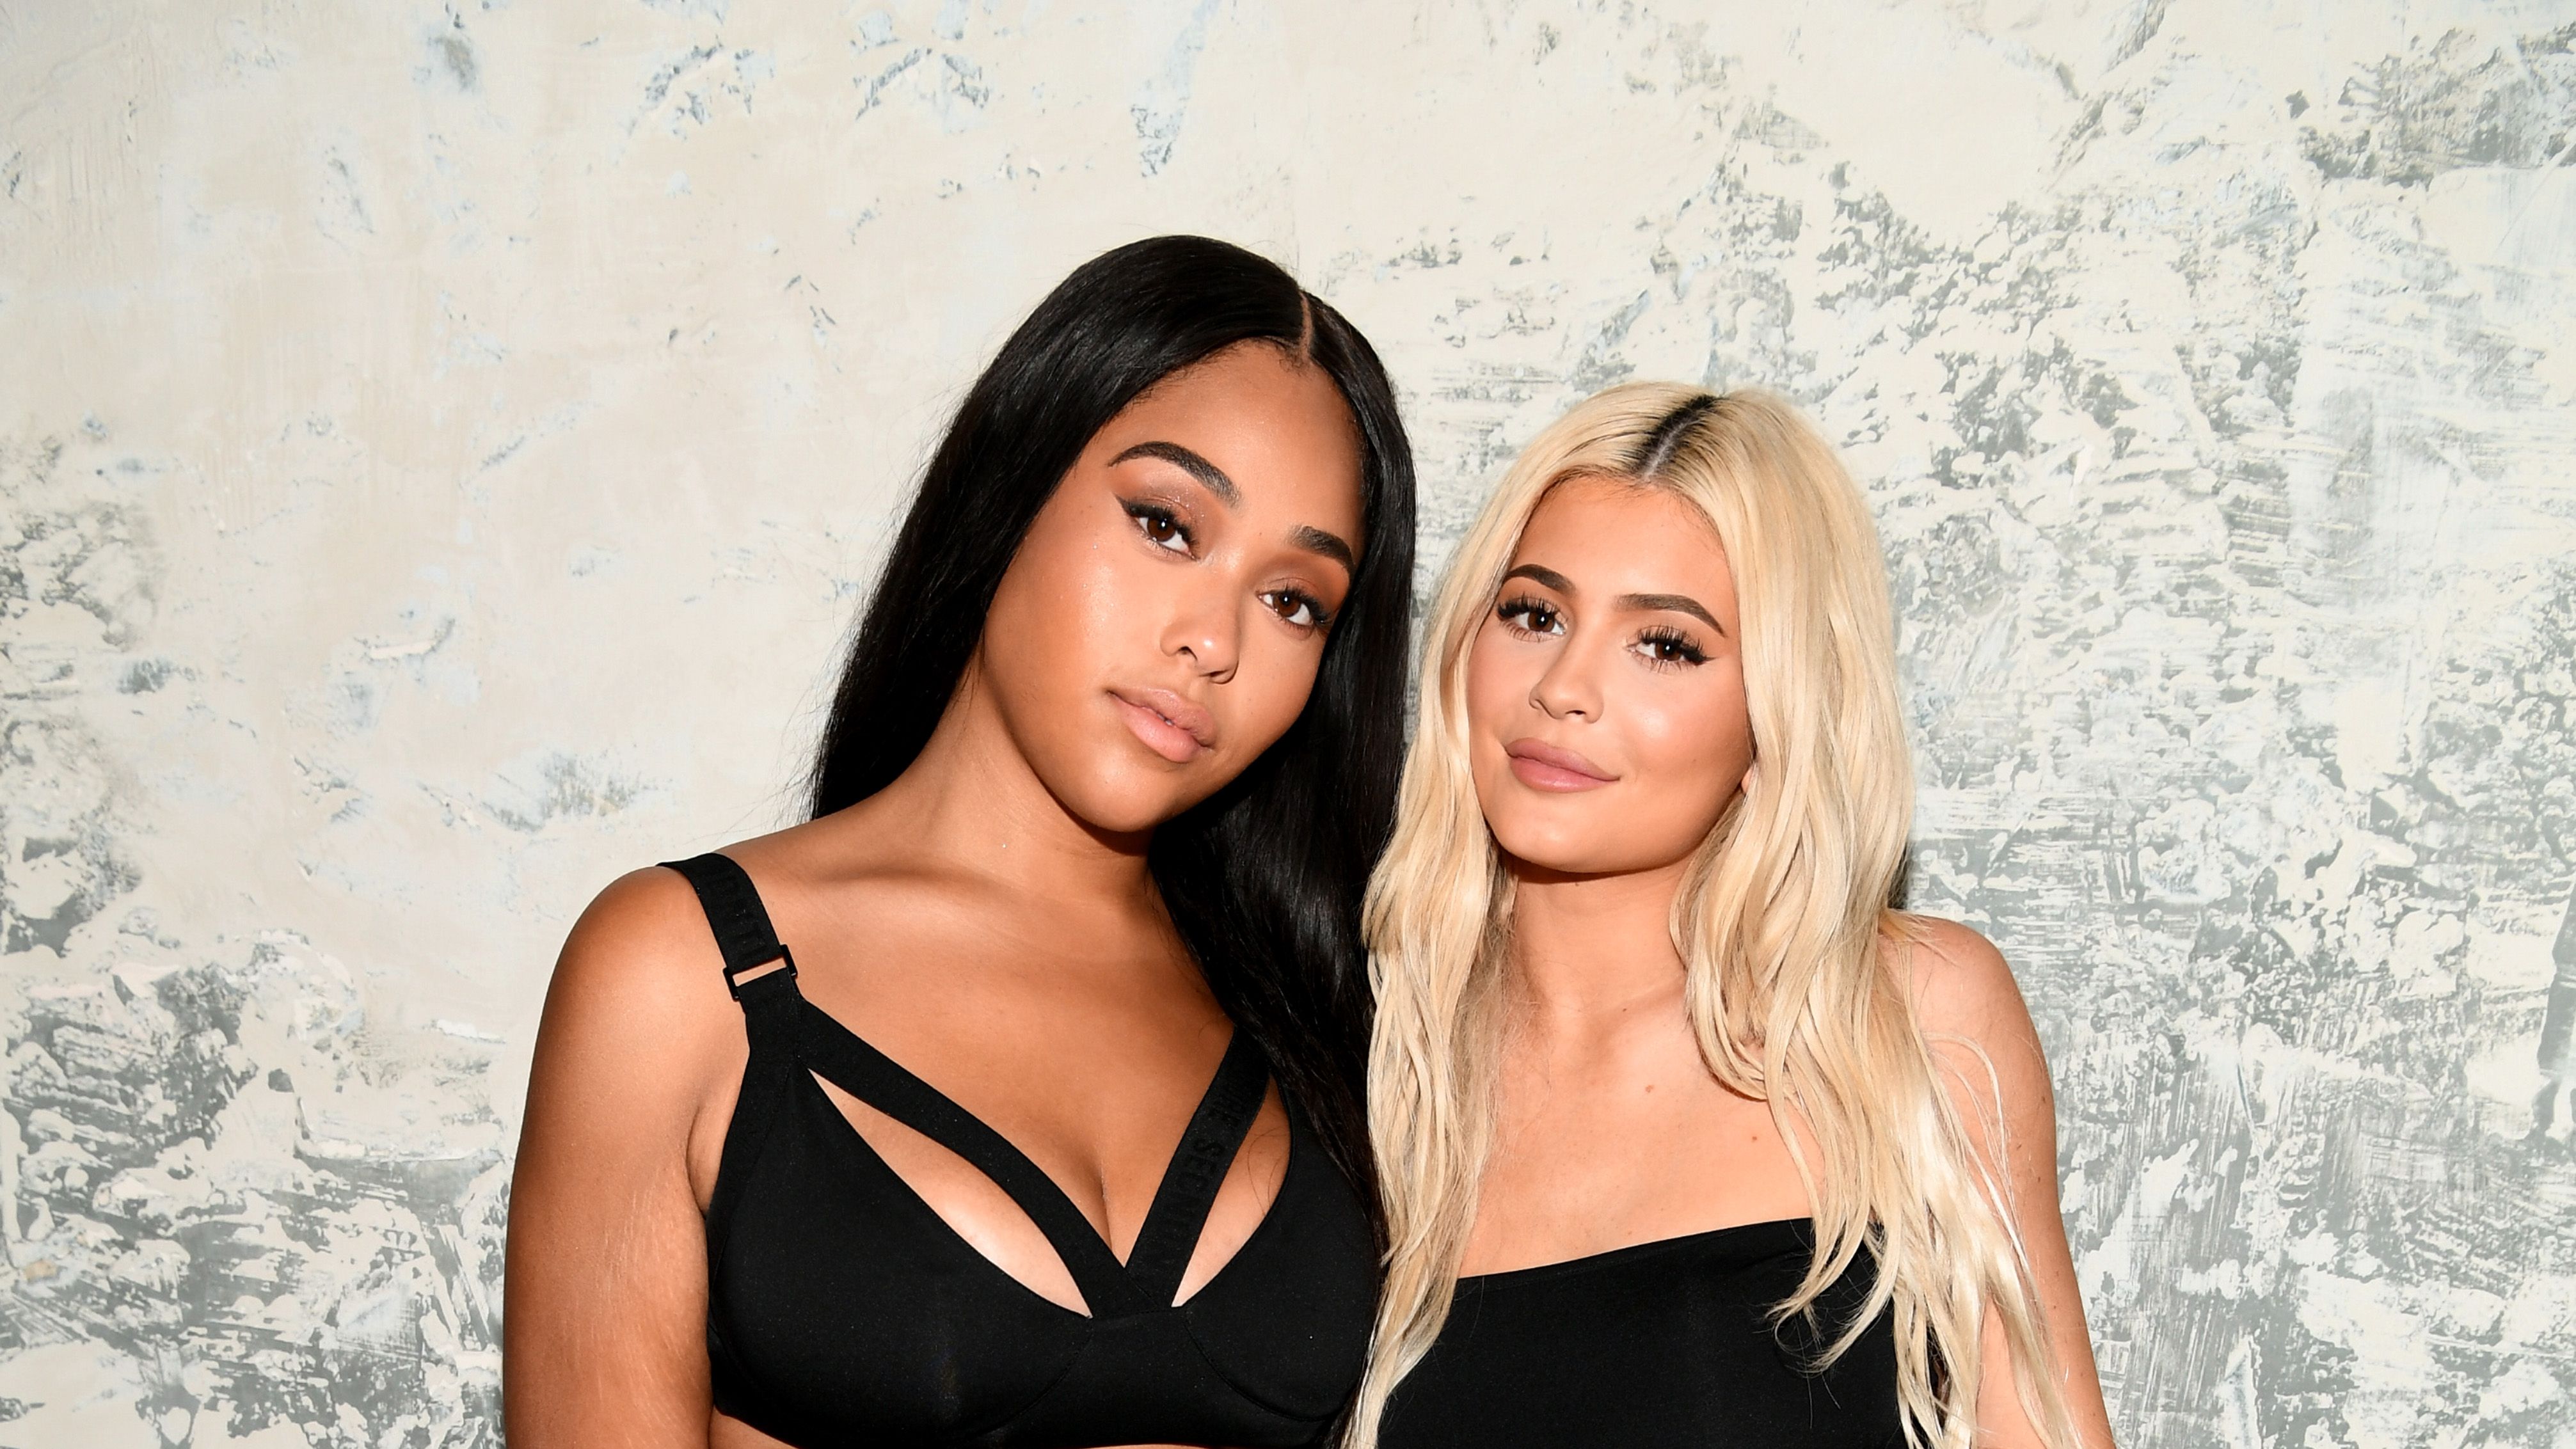 Jordyn Woods' net worth, career, collaborations, and assets in 2022 